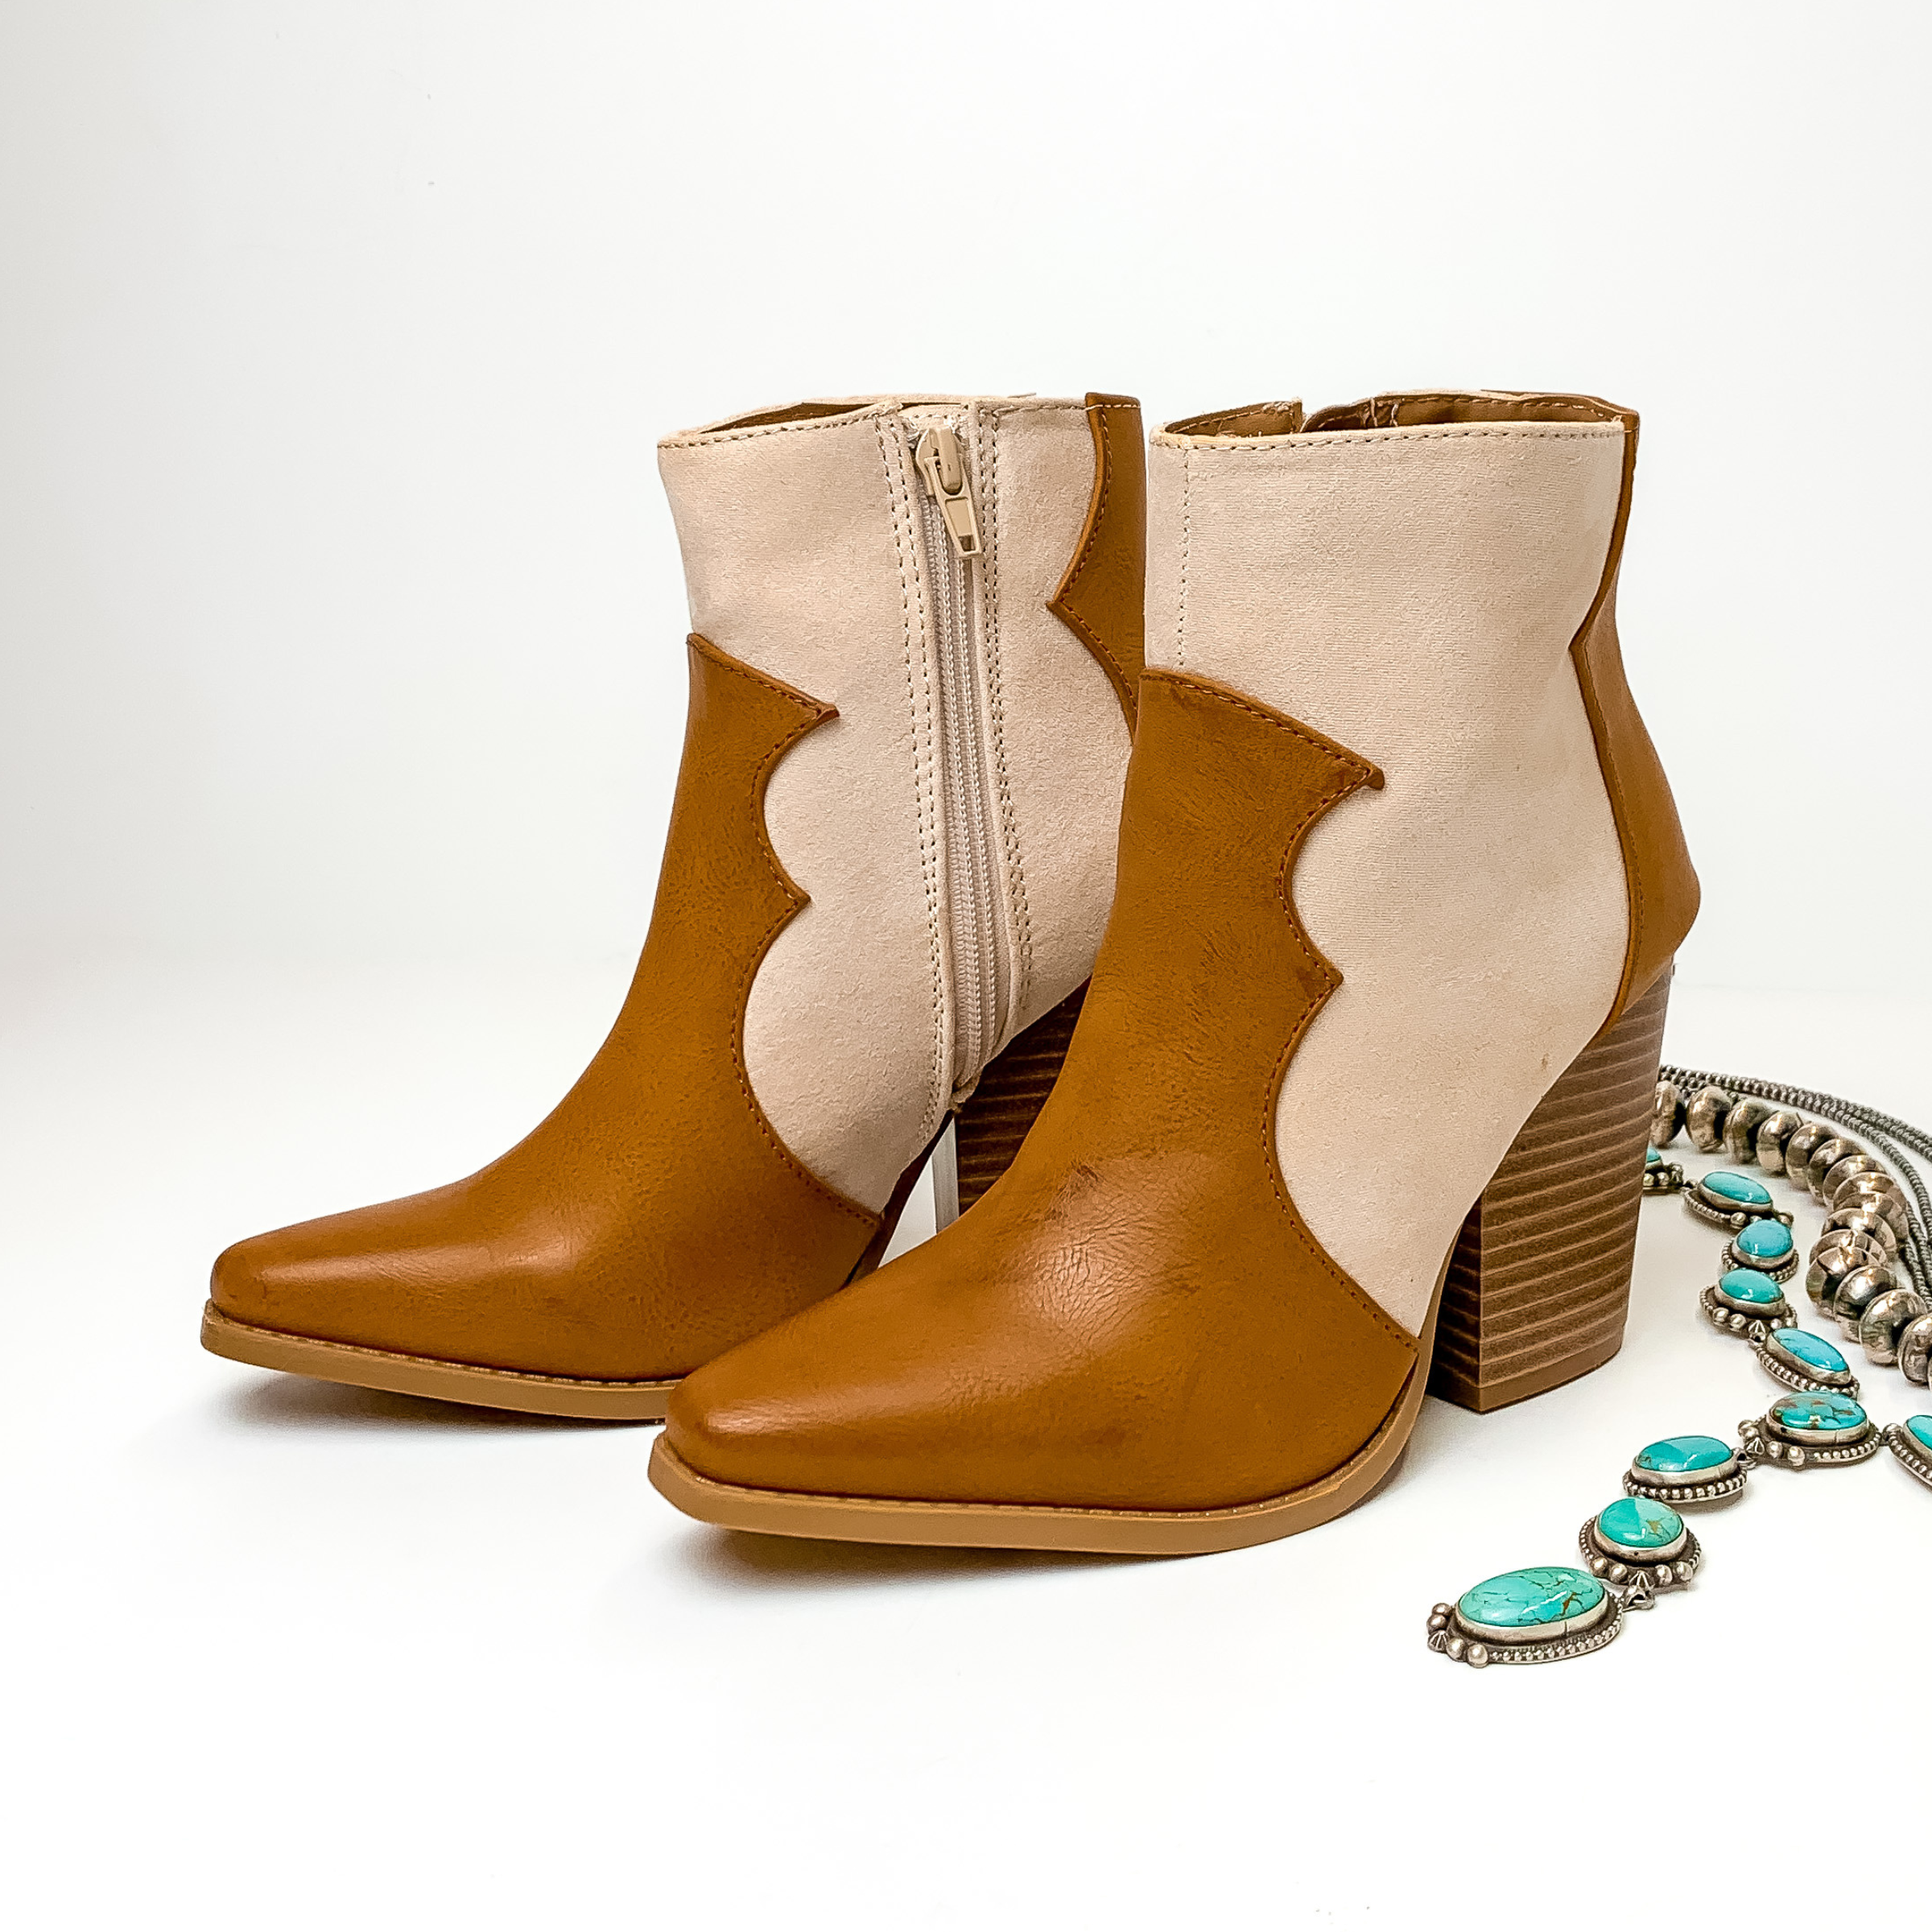 Two tone heeled booties with ivory and camel burnishing. These boots are pictured on a white background with jewelry laying to the right of the boots. 